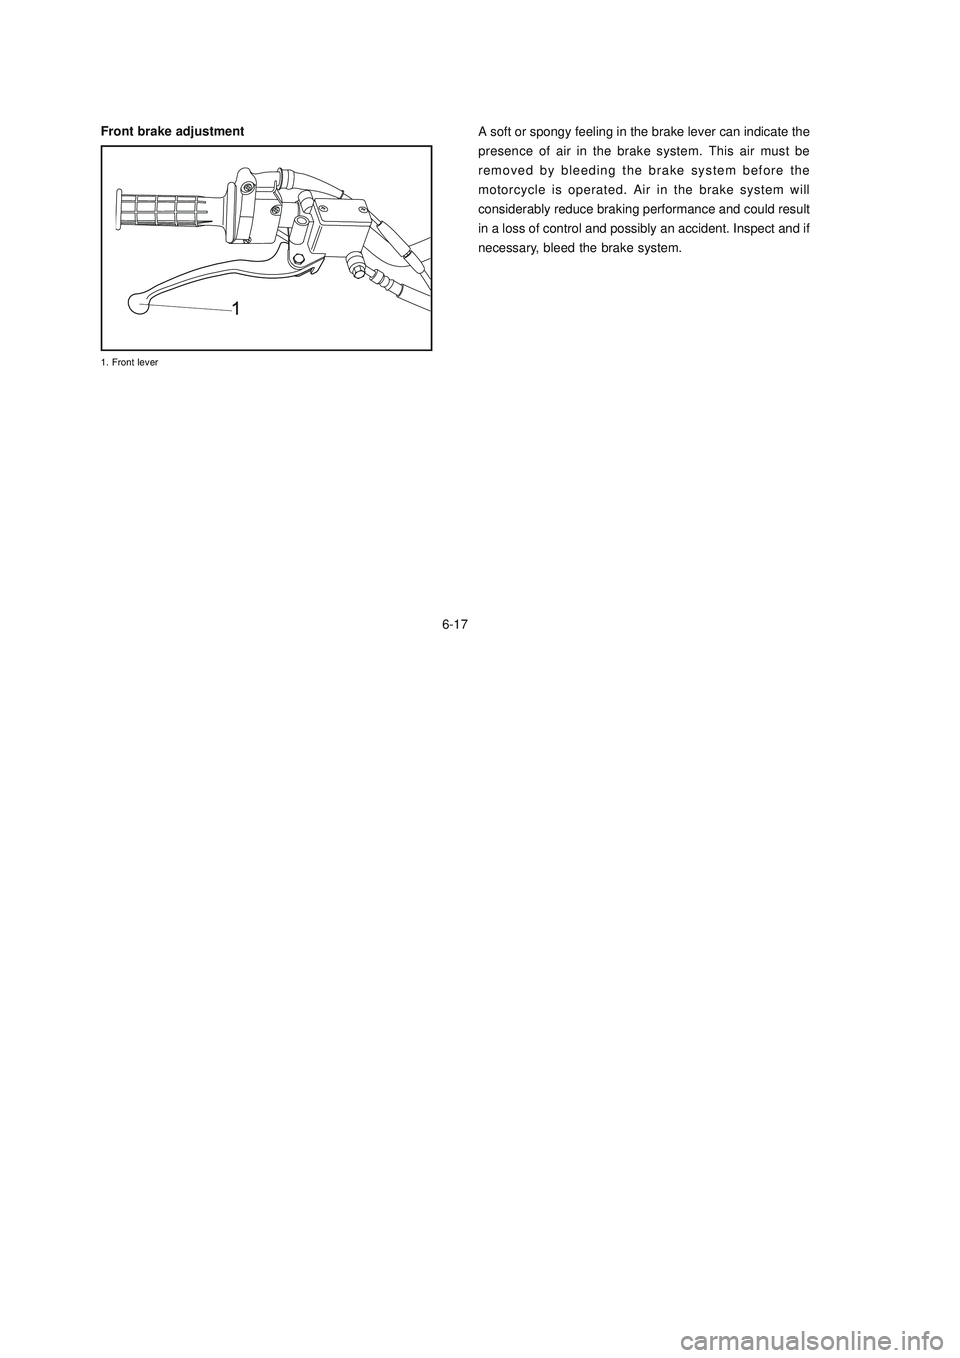 YAMAHA XTZ125 2008  Owners Manual 6-17
6-17
Front brake adjustment
A soft or spongy feeling in the brake lever can indicate the
presence of air in the brake system. This air must be
removed by bleeding the brake system before the
moto